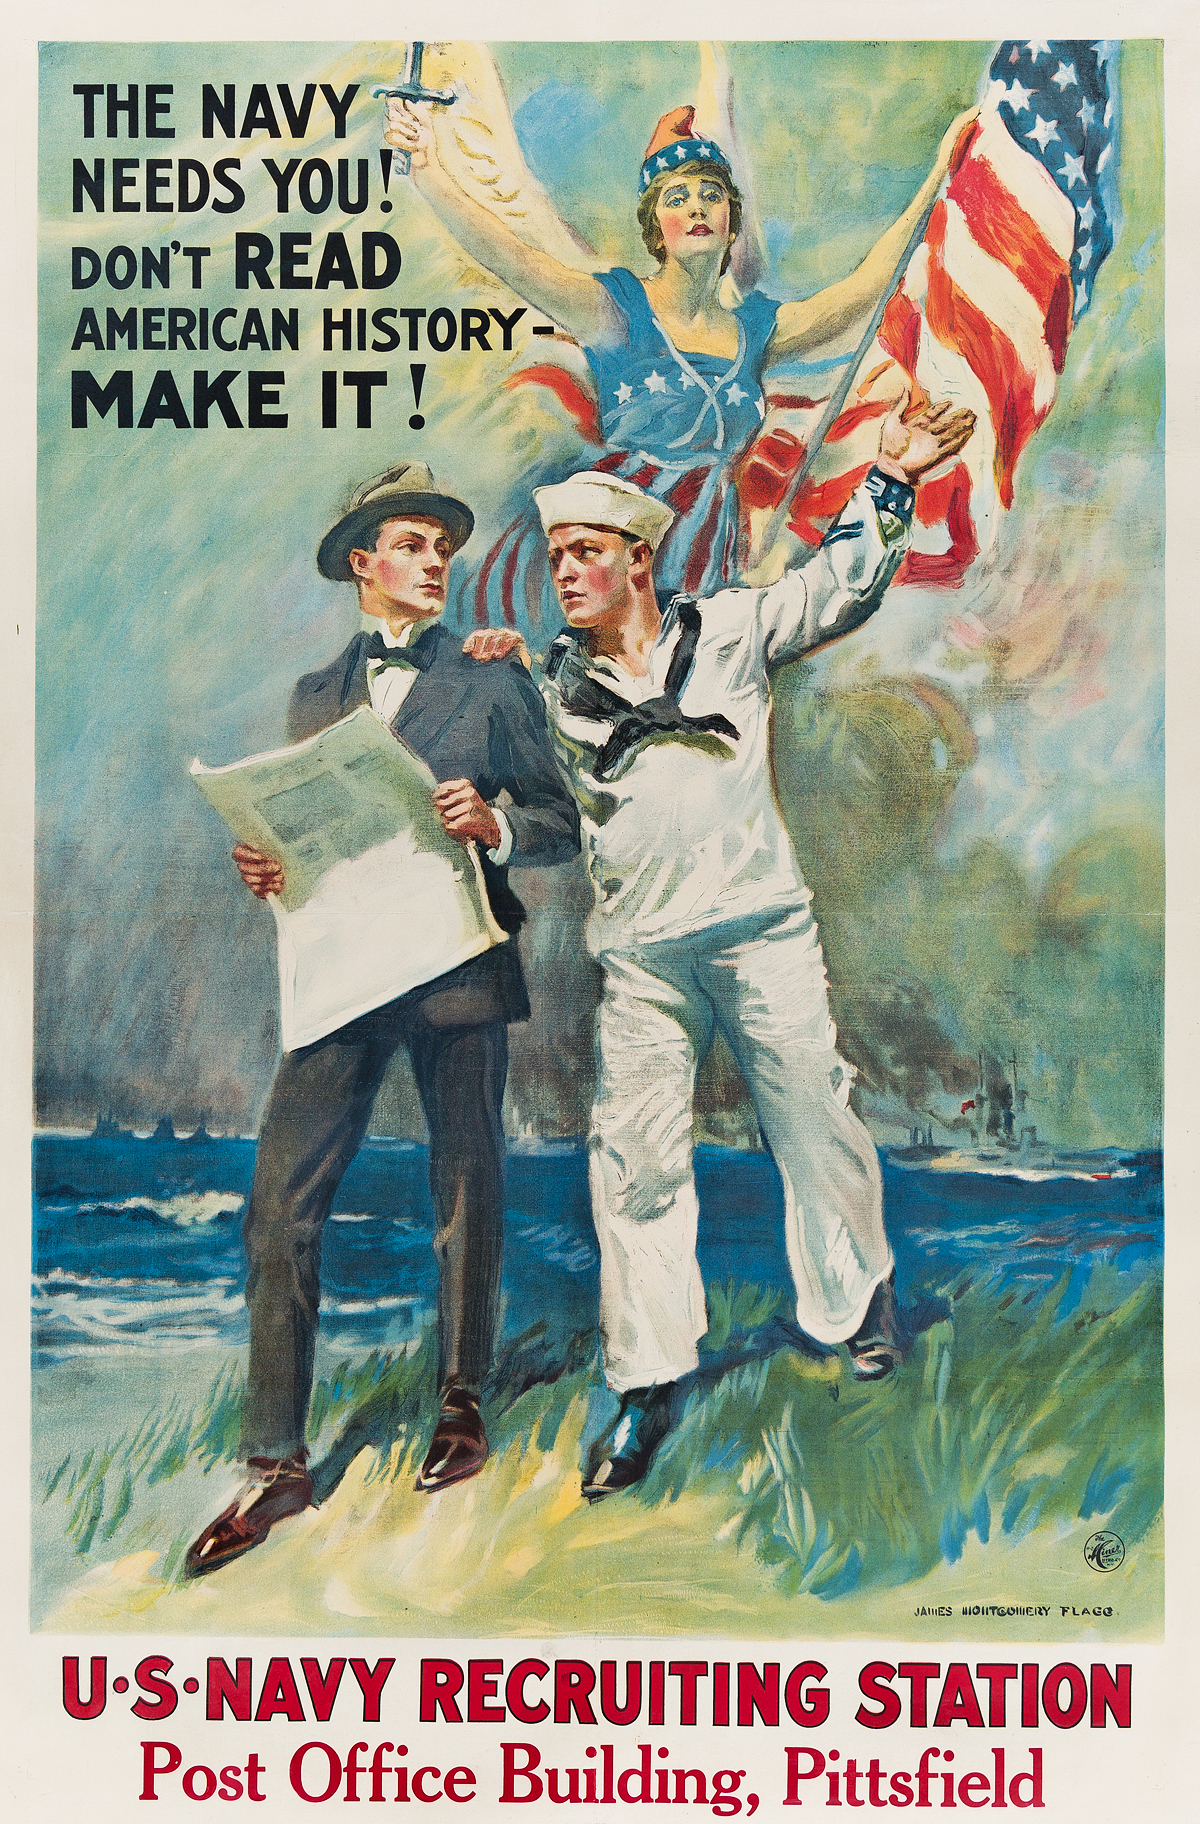 JAMES MONTGOMERY FLAGG (1870-1960). THE NAVY NEEDS YOU! DONT READ AMERICAN HISTORY - MAKE IT! 1917. 42x28 inches, 108x71 cm. The H.C.